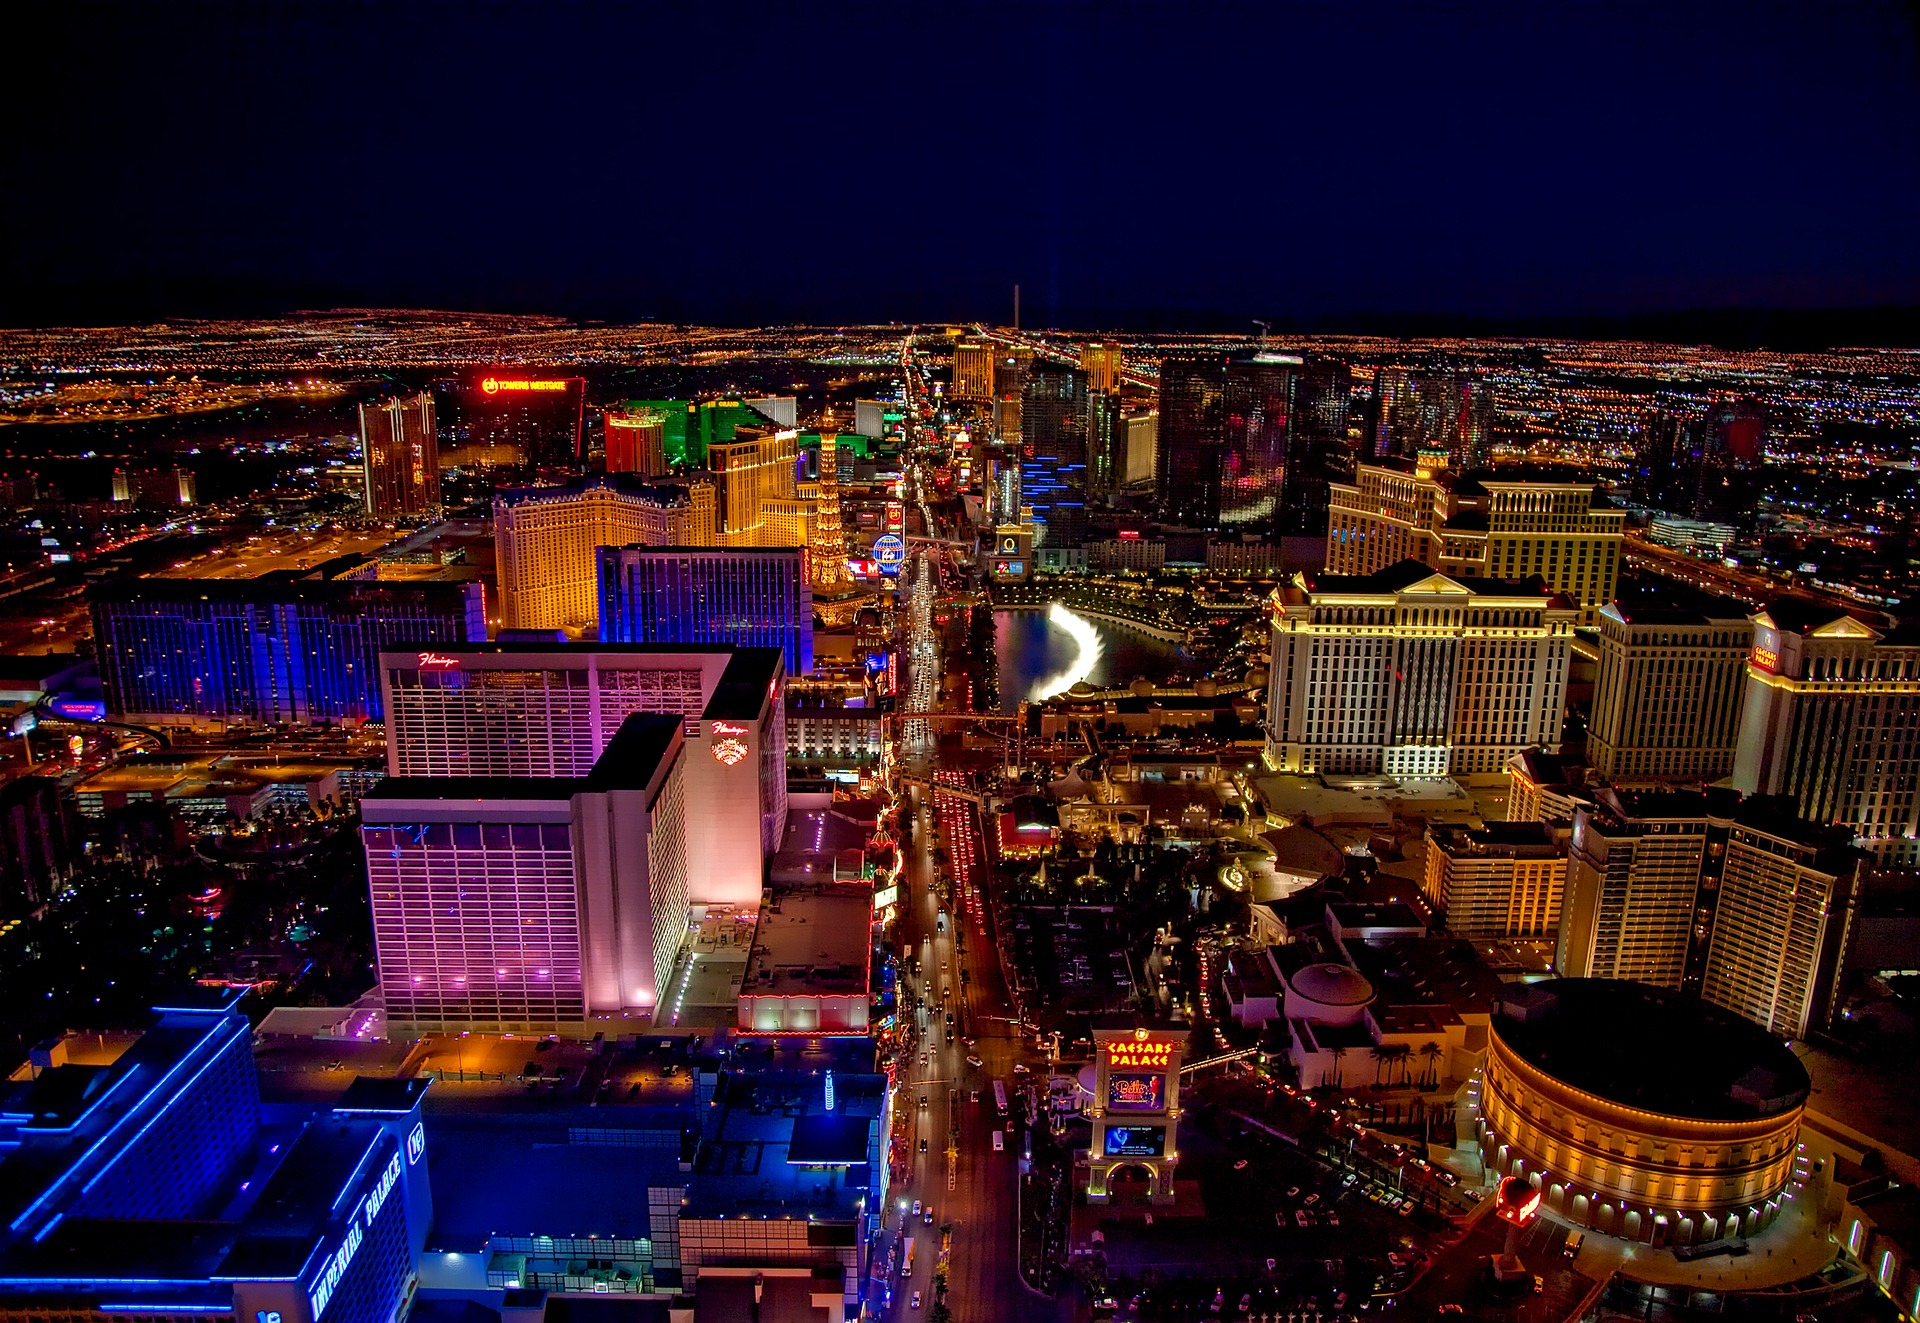 Las Vegas Territory, Nevada: Attractions In and Around the City